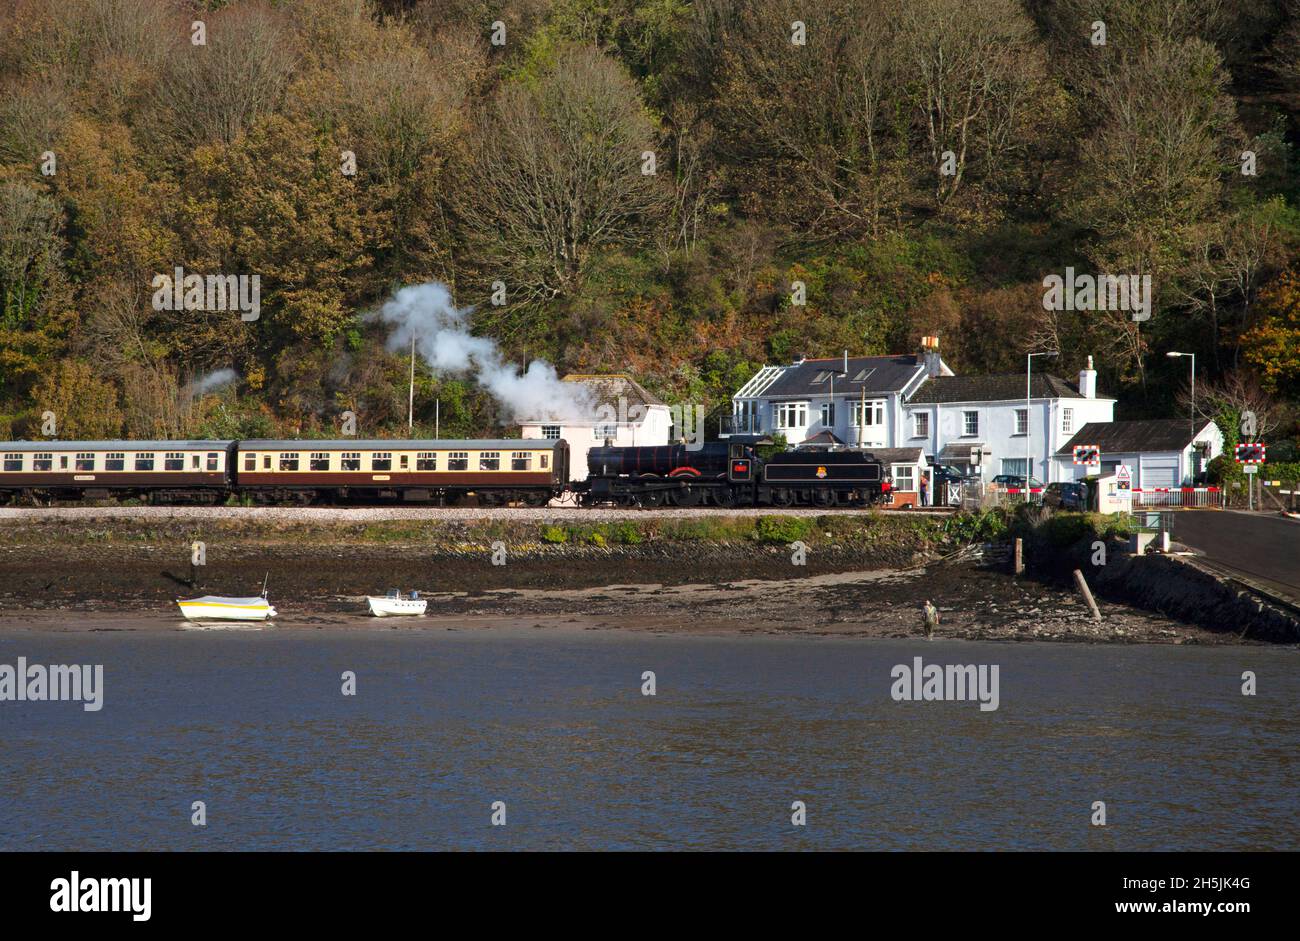 Dartmouth steam railway train engine locomotive carriages Autumn Fall leaves level crossing River Dart Devon copy space boats fisherman Stock Photo